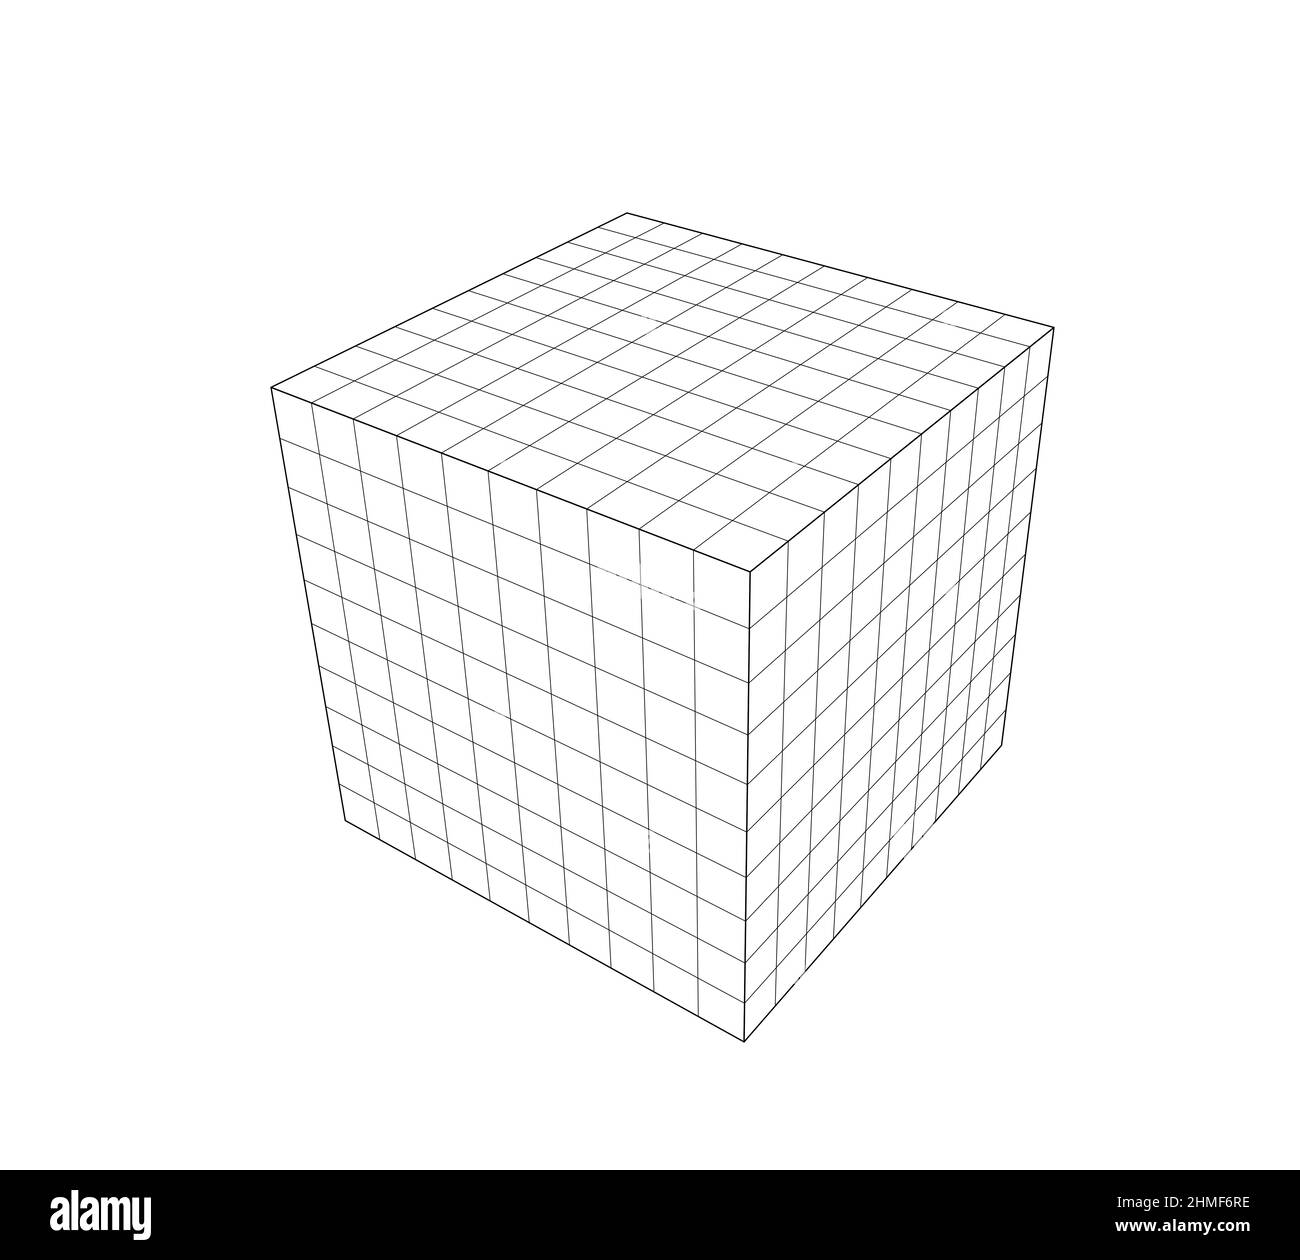 3D perspective view of a grid cube Stock Photo